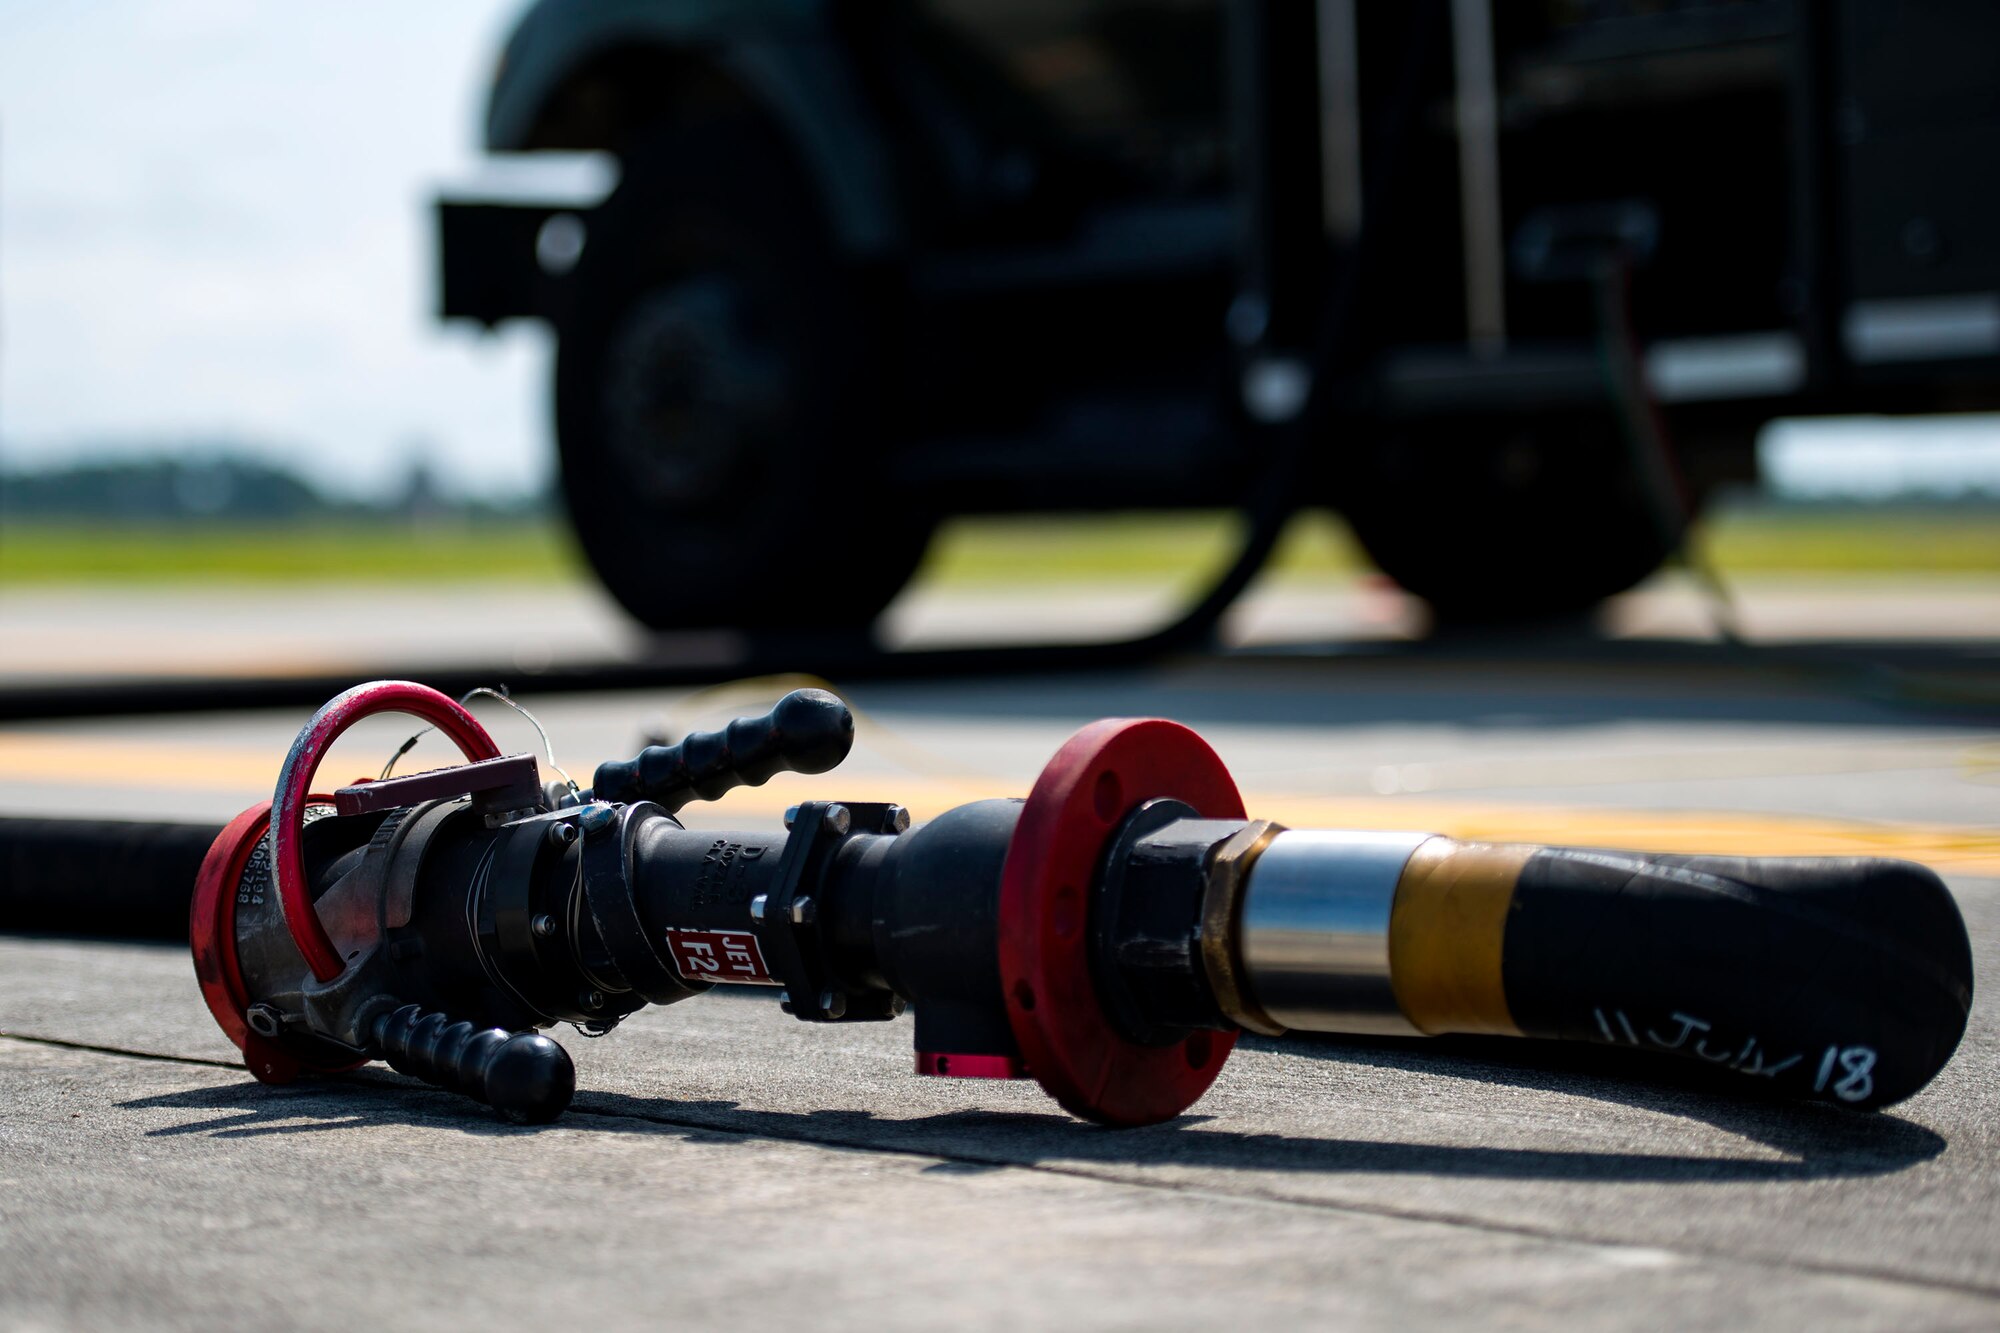 A refuel hose rests on the flightline during a hot pit refueling, Aug. 14, 2018, at Moody Air Force Base, Ga. Members of the 23d Logistics Readiness Squadron preposition fueling trucks to allow aircraft to refuel without needing to shut down. This style of refueling is used to eliminate the need for additional maintenance procedures and to extend pilots’ training time per flight which improves operations tempo. (U.S. Air Force photo by Airman 1st Class Erick Requadt)